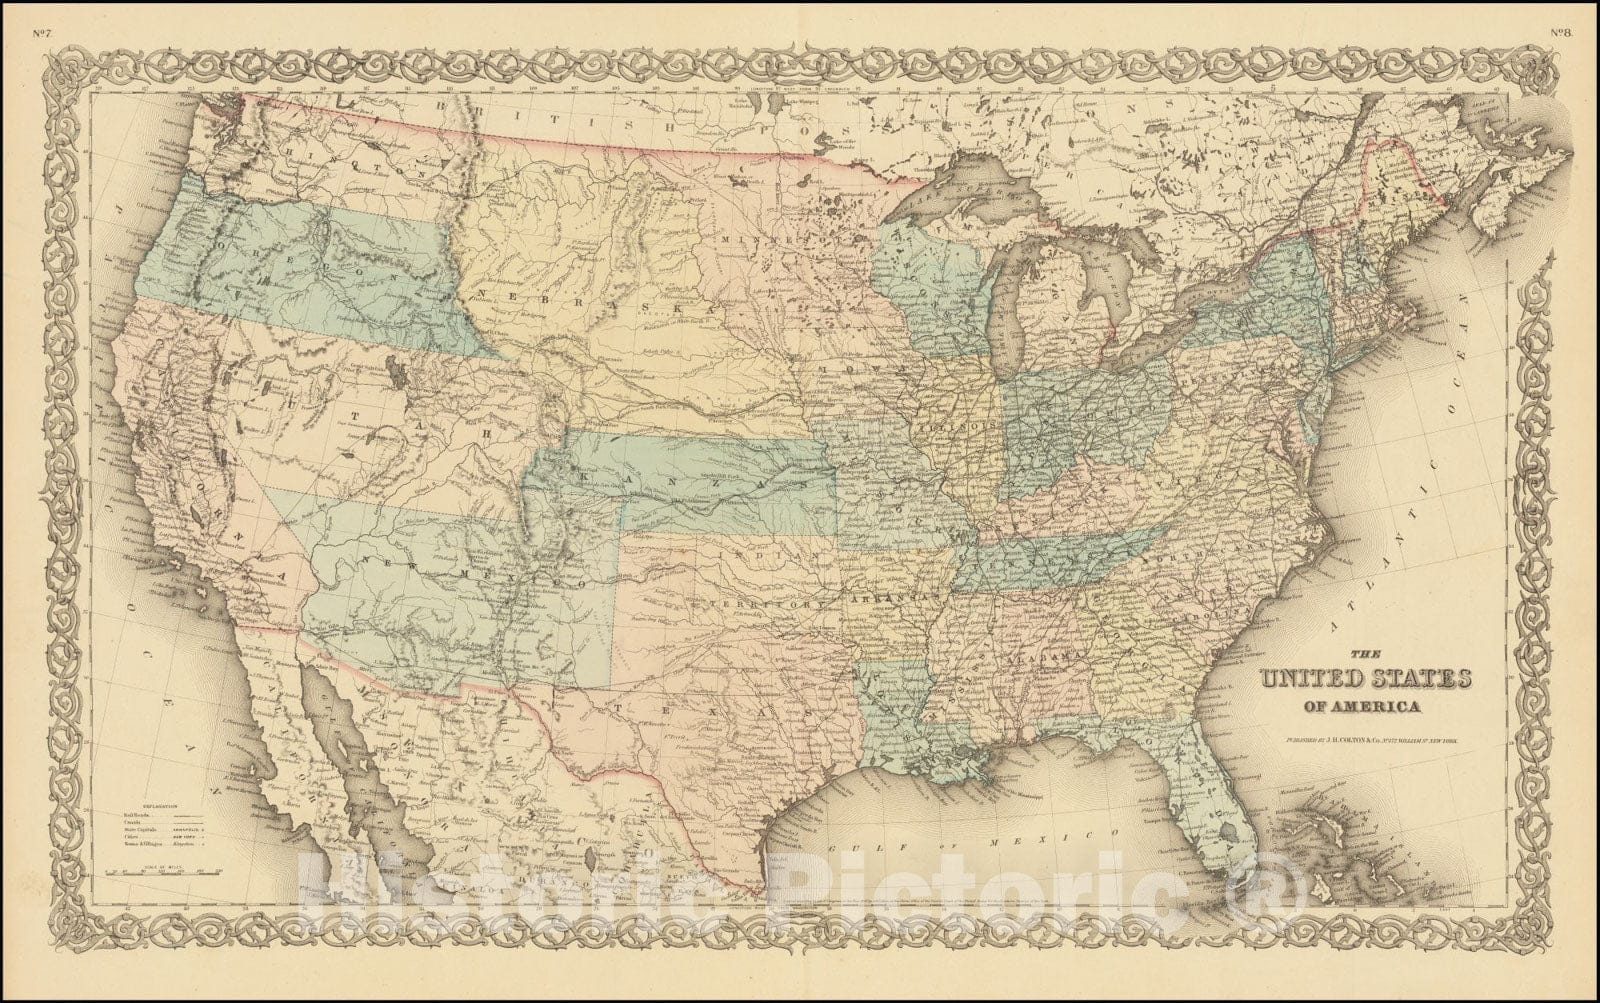 Historic Map : The United States of America, 1855, Vintage Wall Art